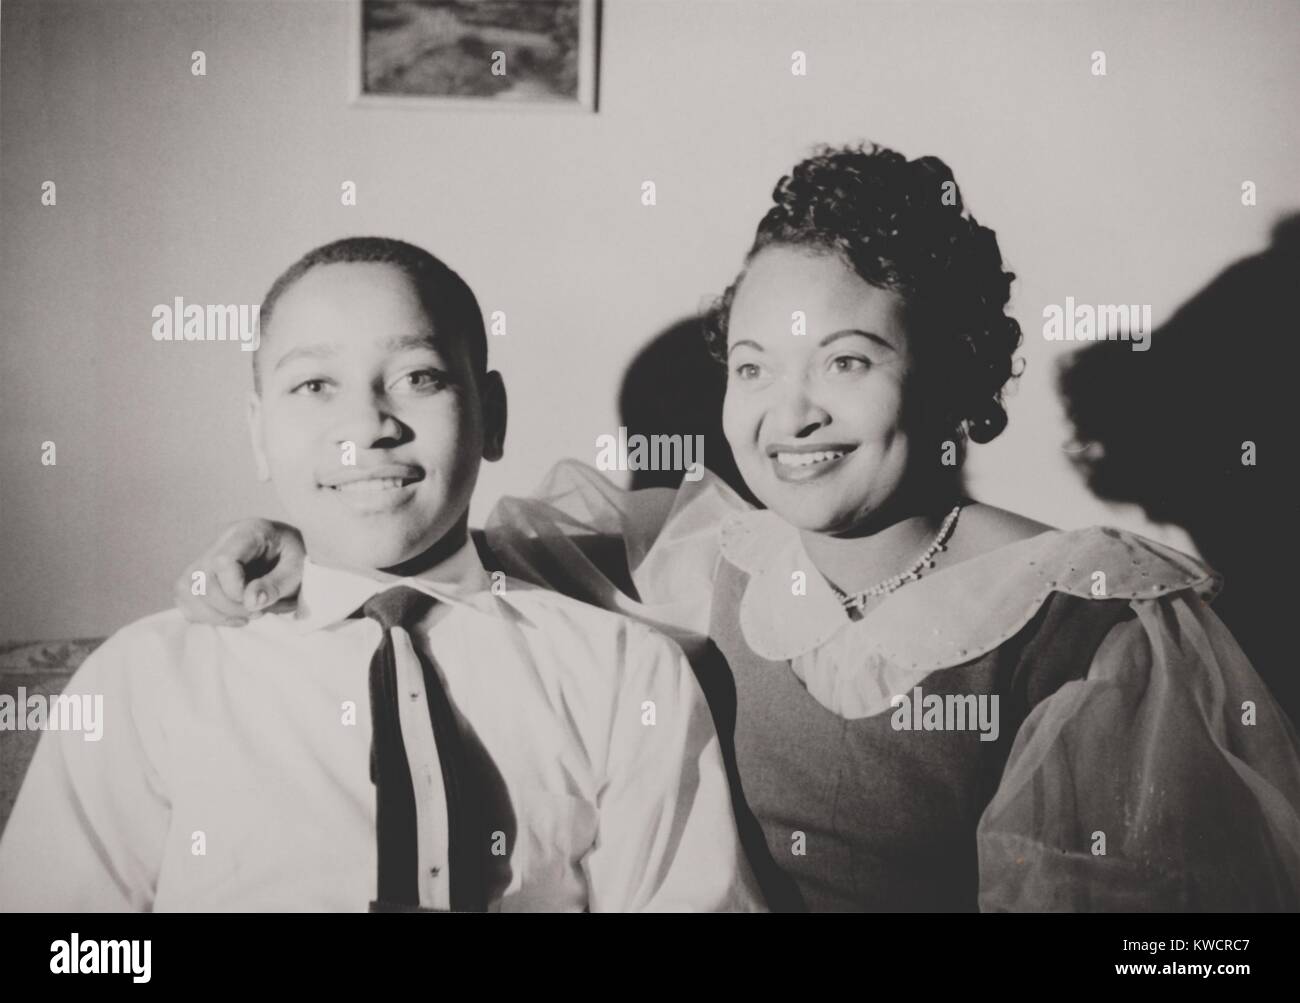 Emmett Till with his mother, Mamie Bradley, ca. 1950. To expose the horror of her 14 year-old's lynching, she ordered an open coffin funeral to show his tortured and mutilated body. - (BSLOC 2015 1 103) Stock Photo